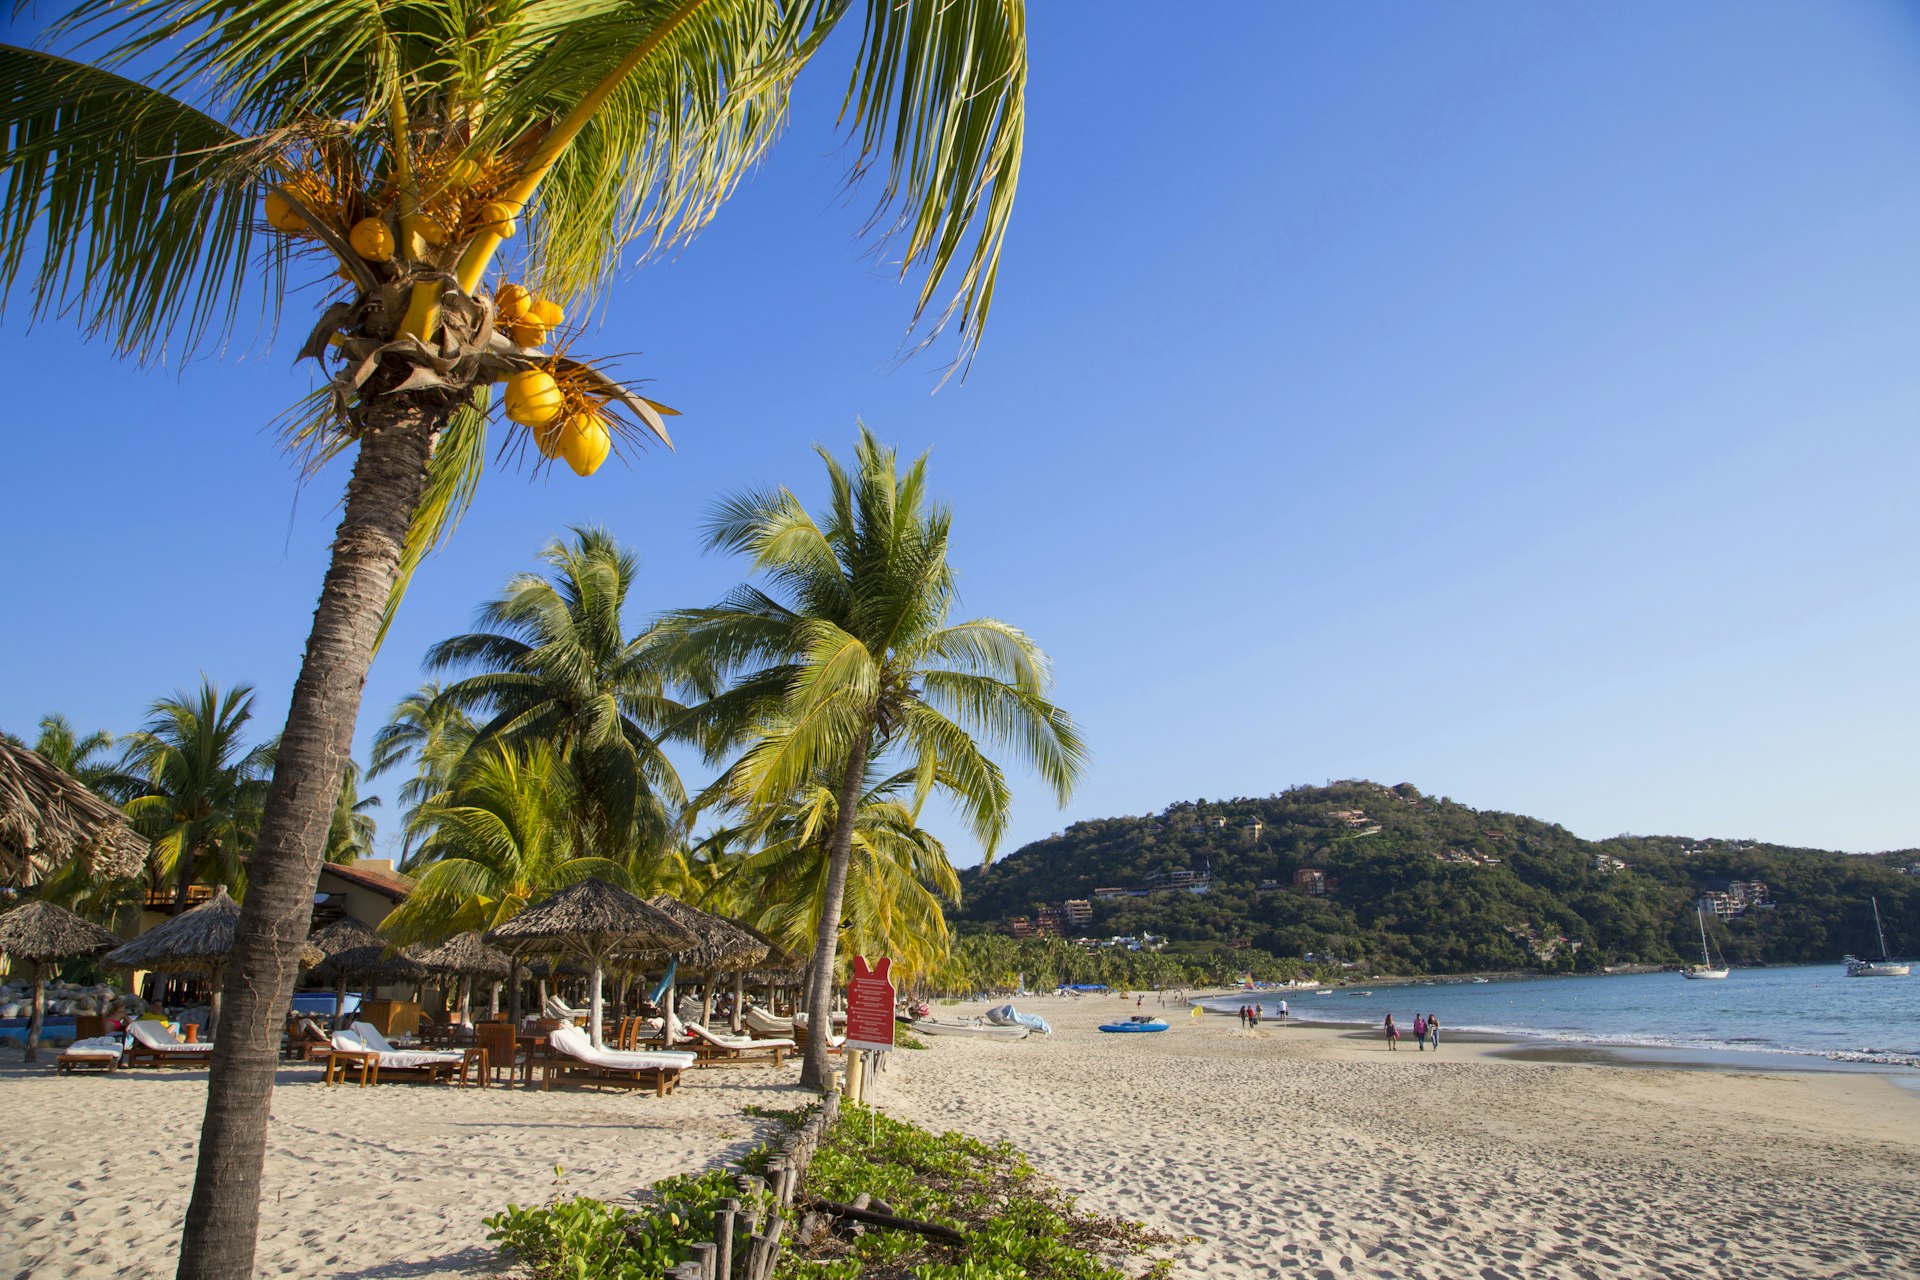 Palm trees, lounge chairs and mountains in the background at Playa La Ropa in Zihuatanejo